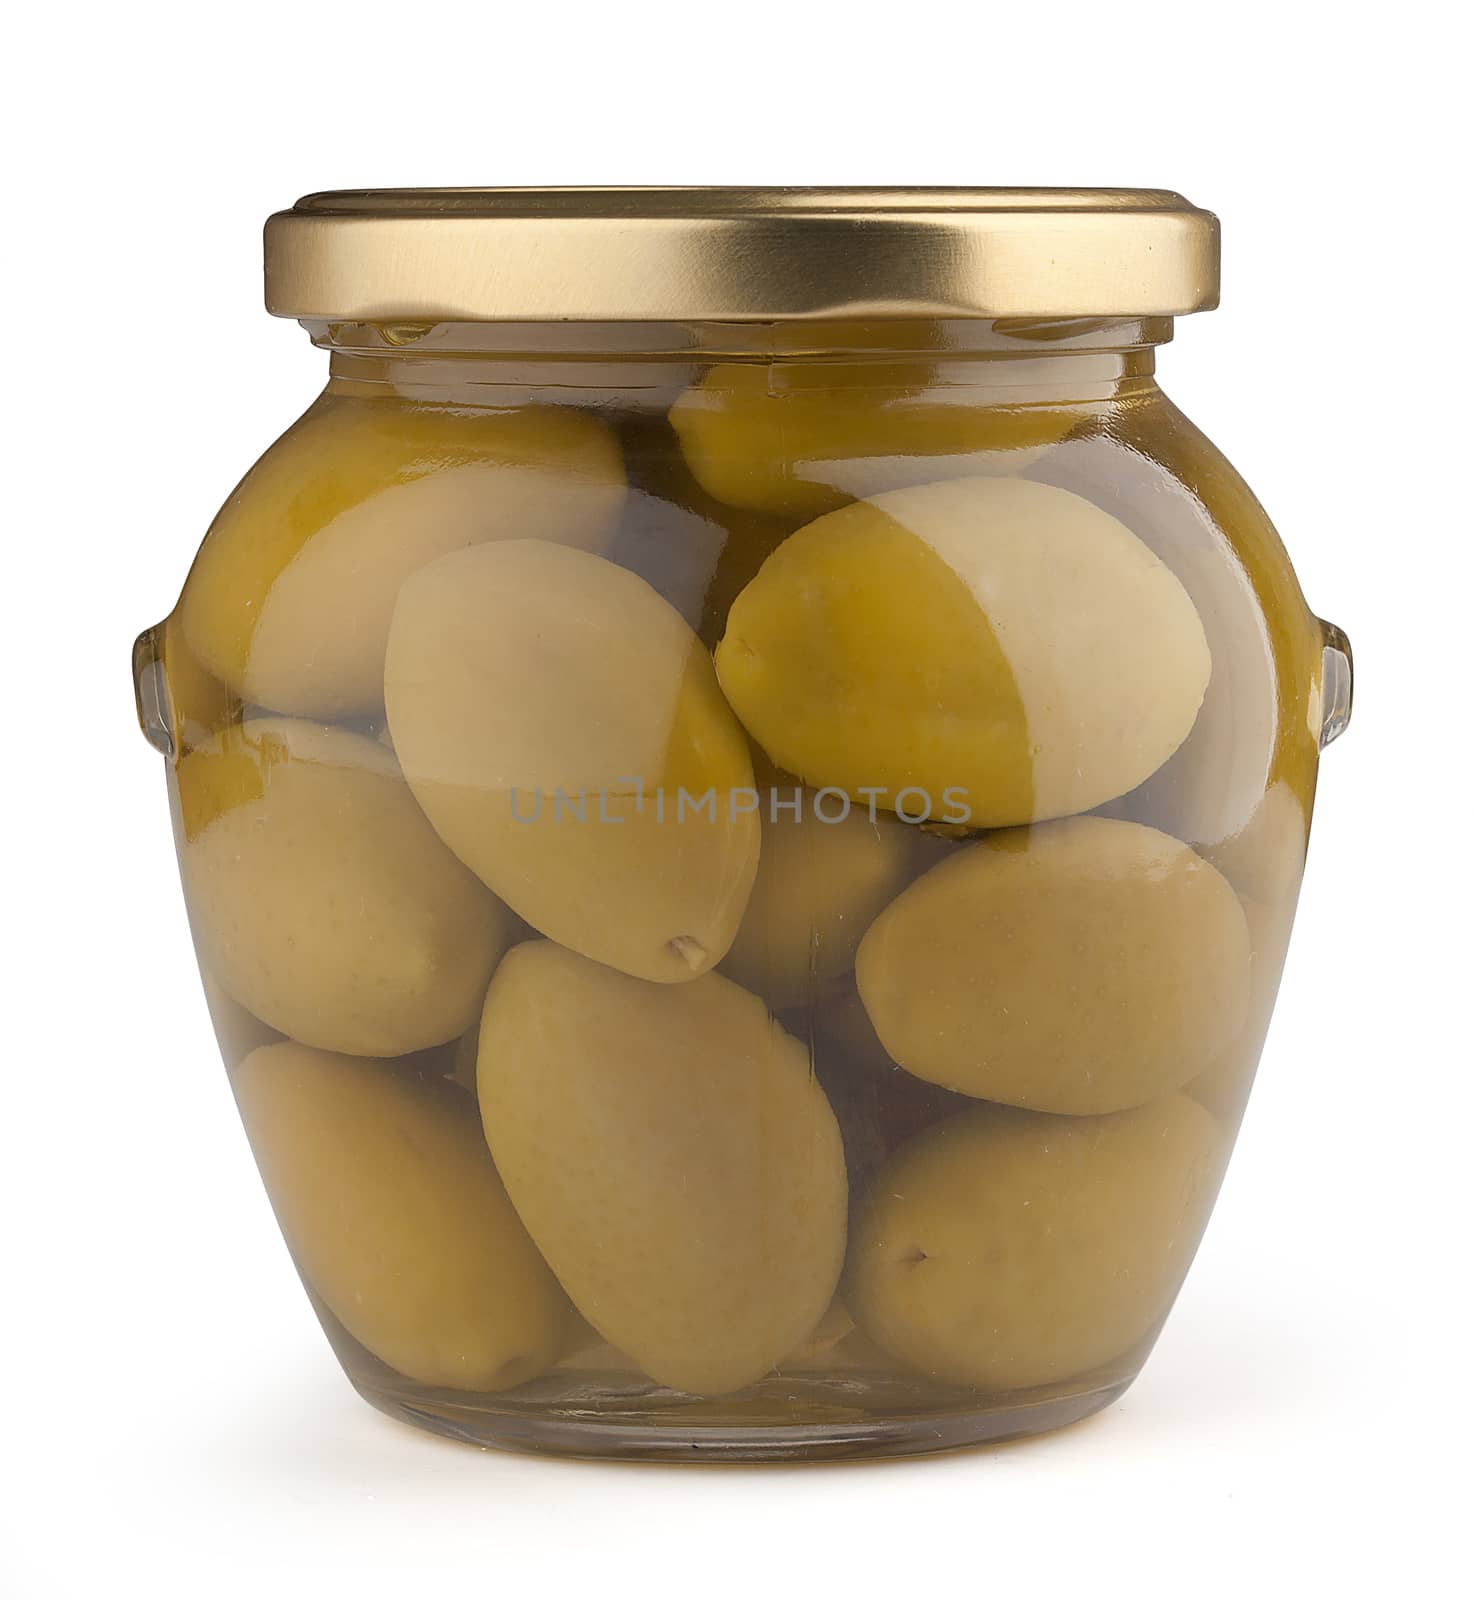 Olives in a glass jar by Angorius